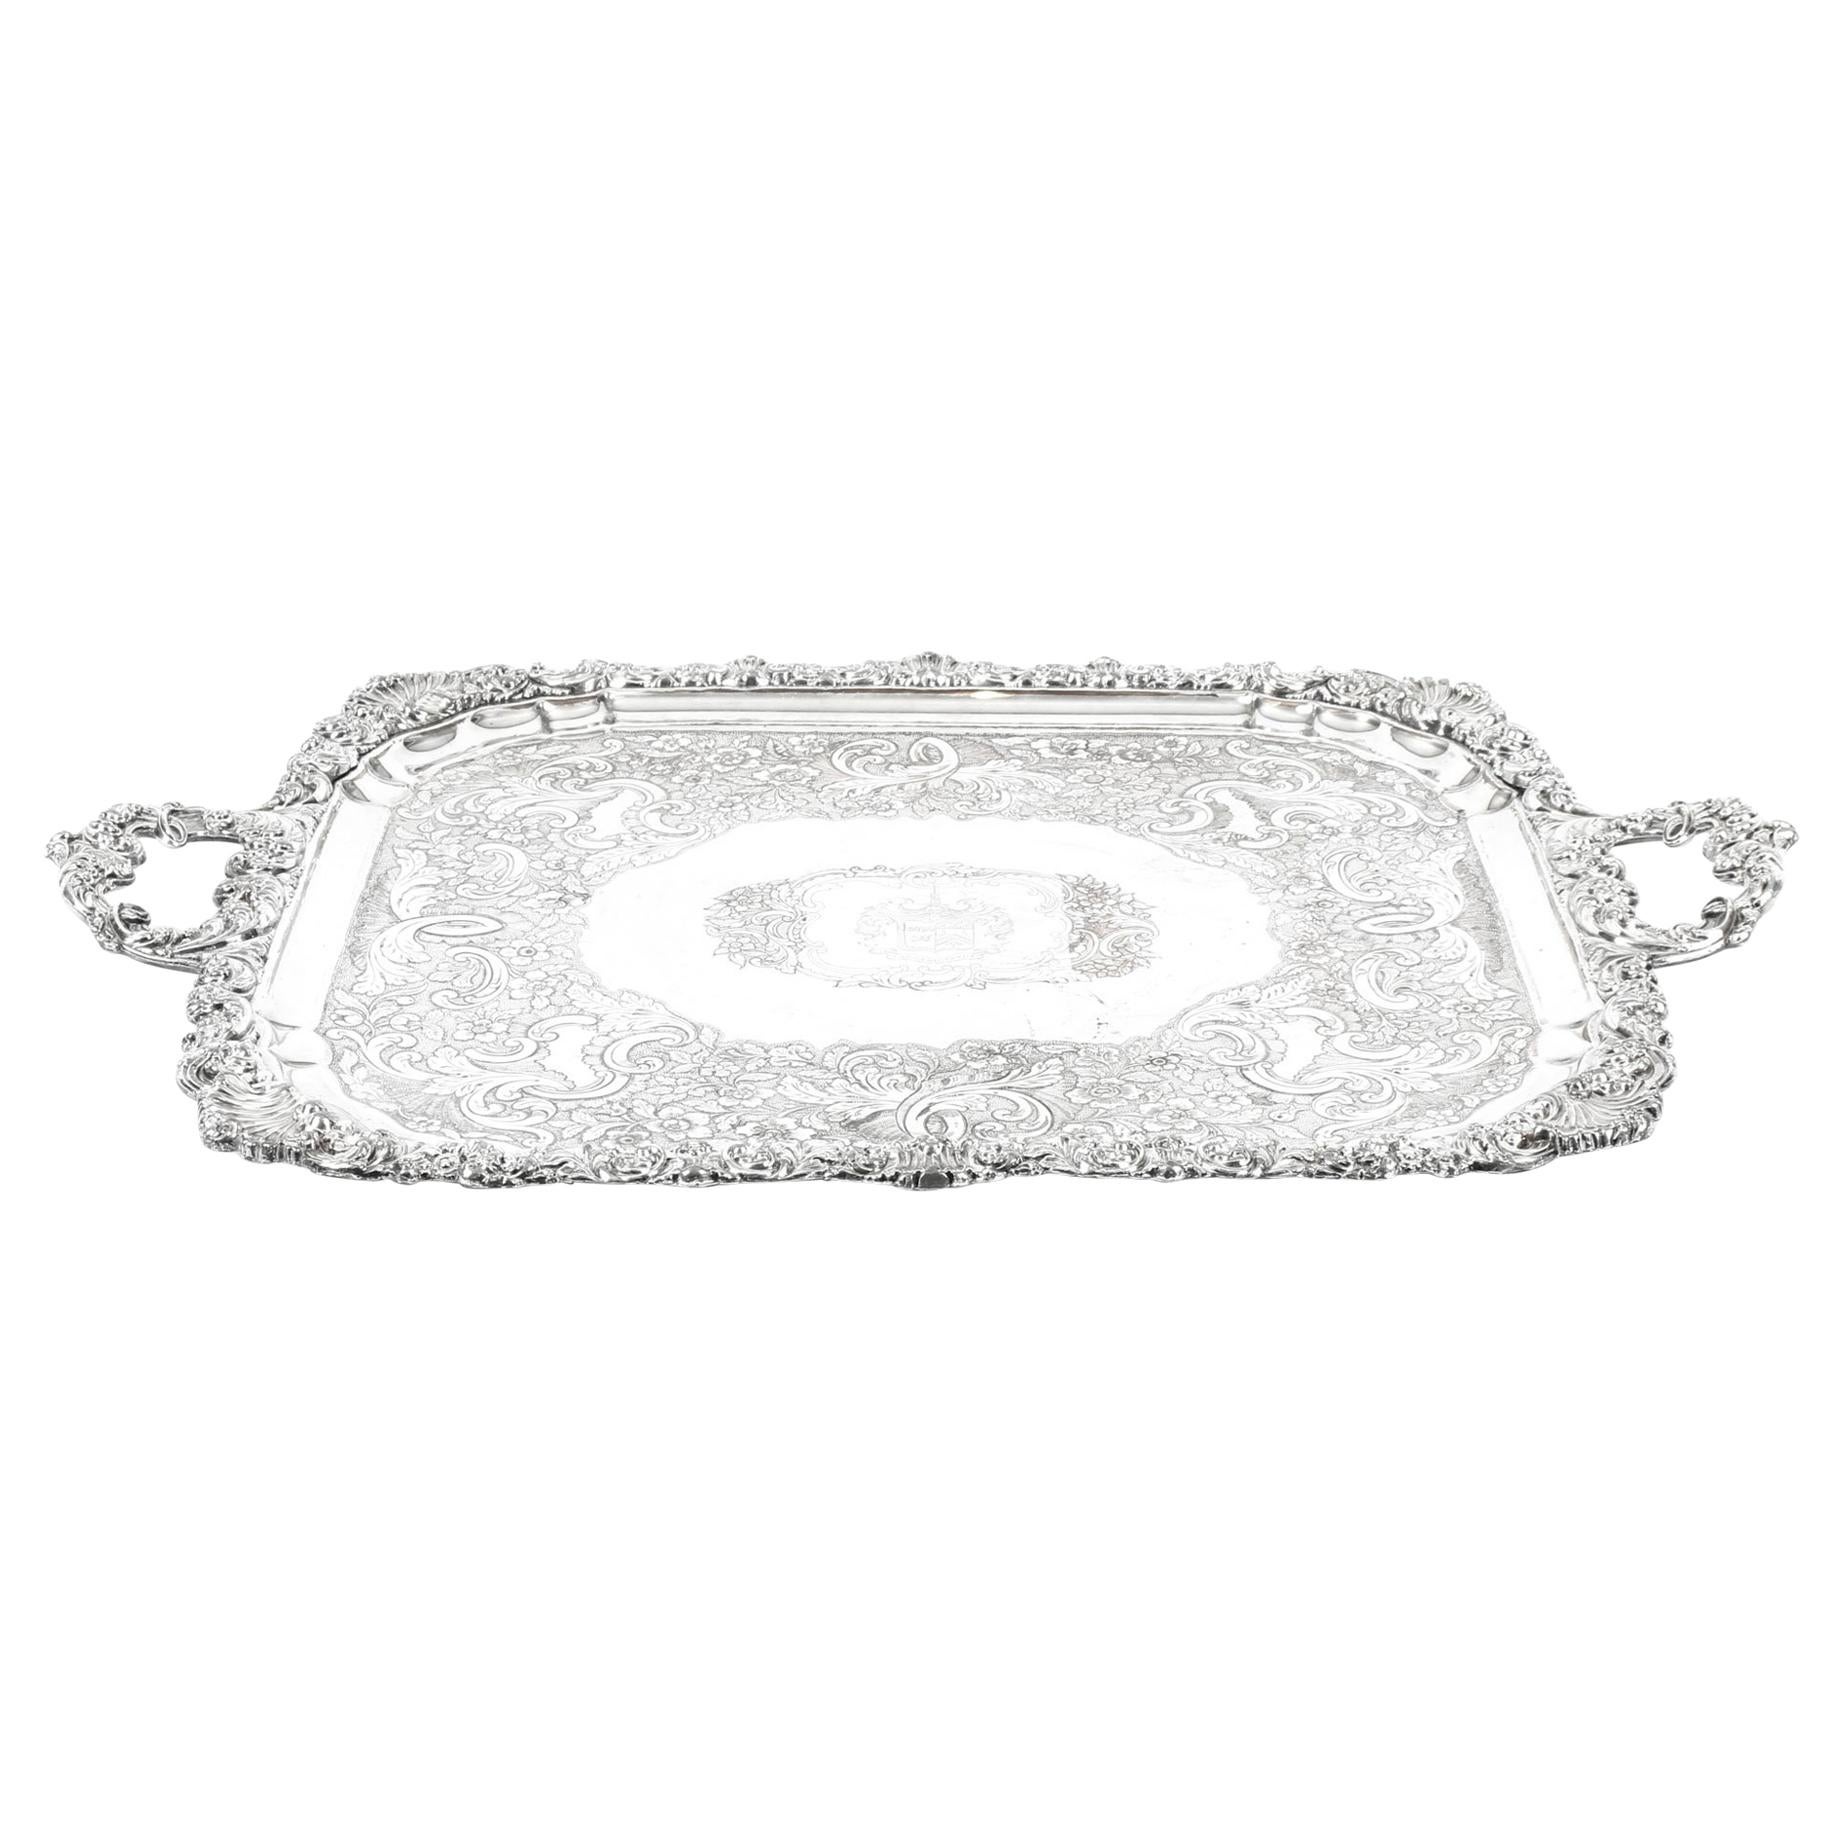 19th Century Regency Old Sheffield Silver Plated Tray with Cavendo Tutus Crest